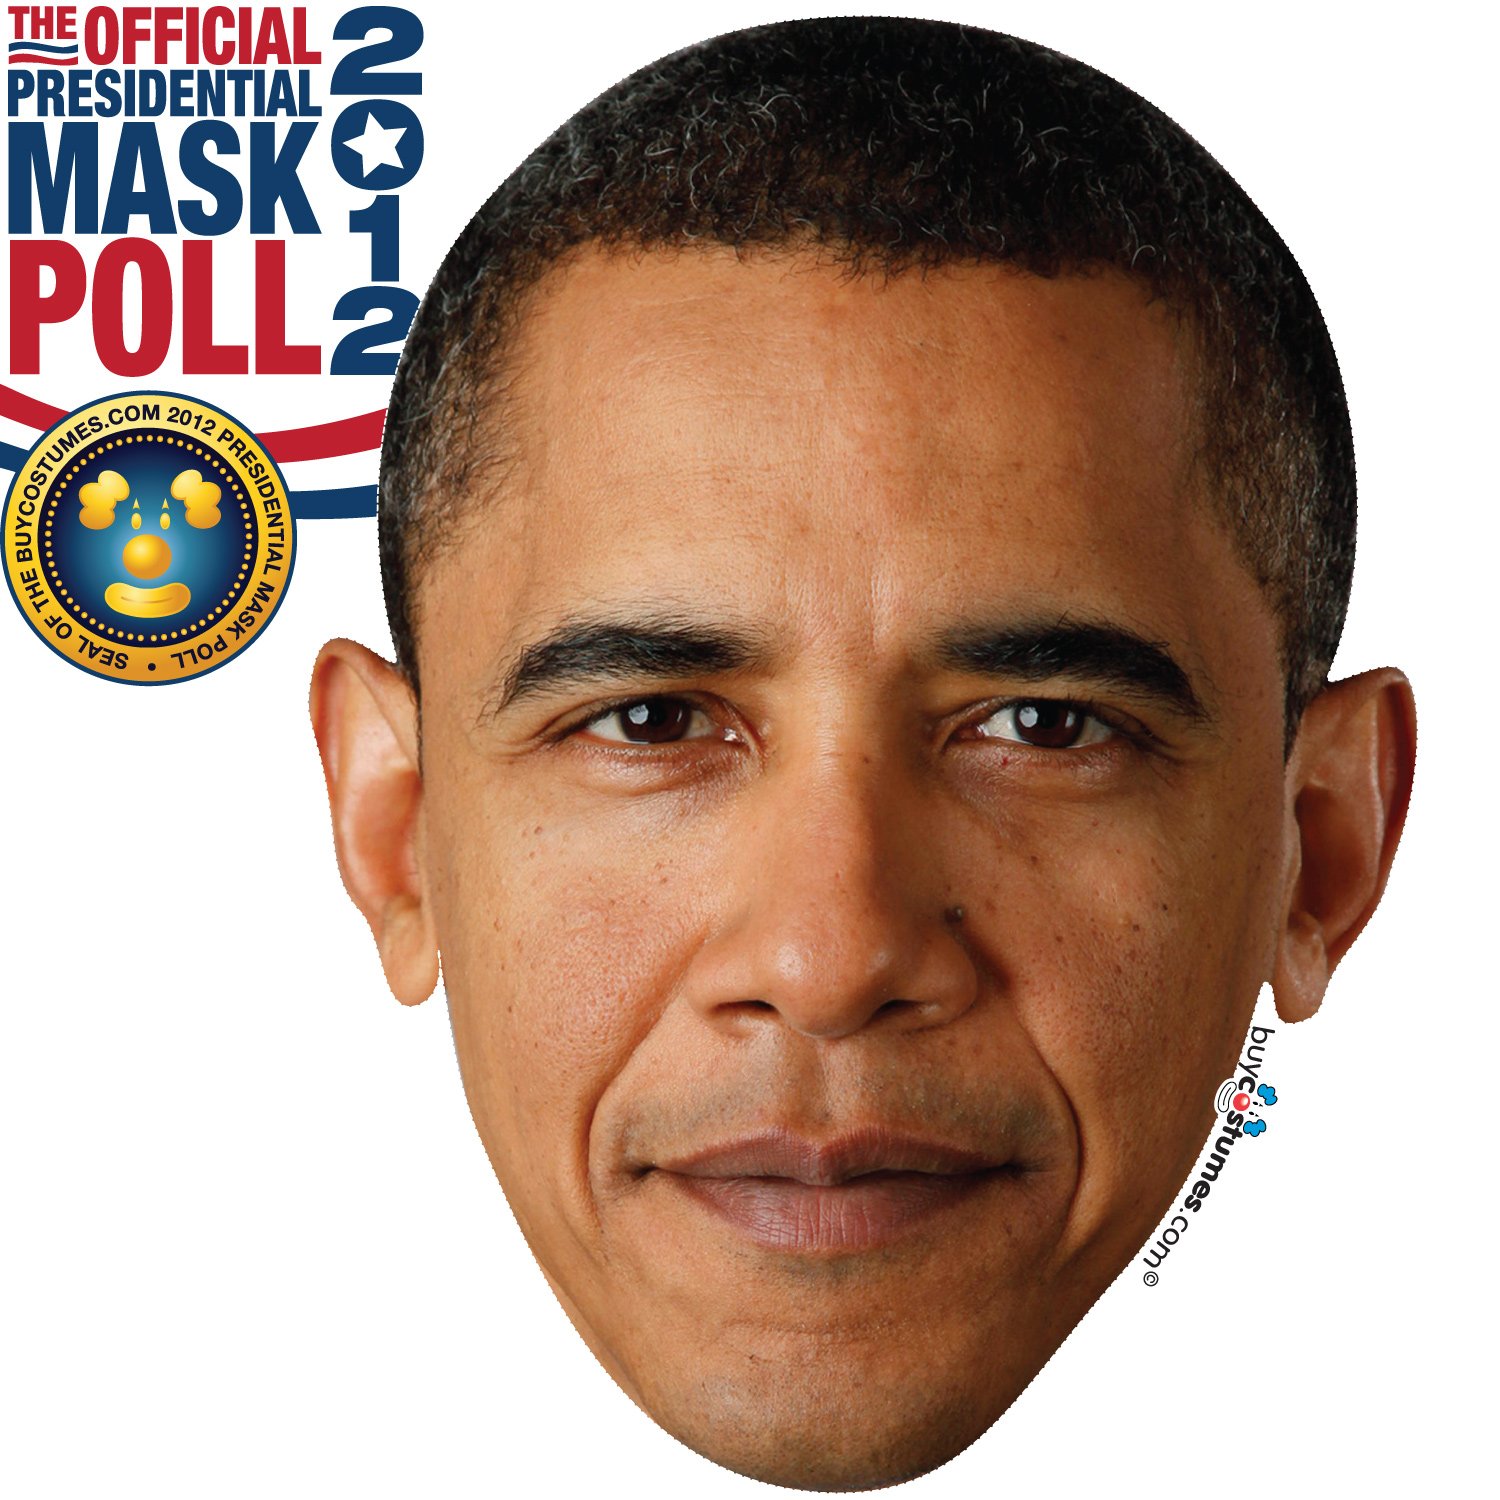 Sales of Paper Masks on BuyCostumes.com Predict GOP Nominee, Next President